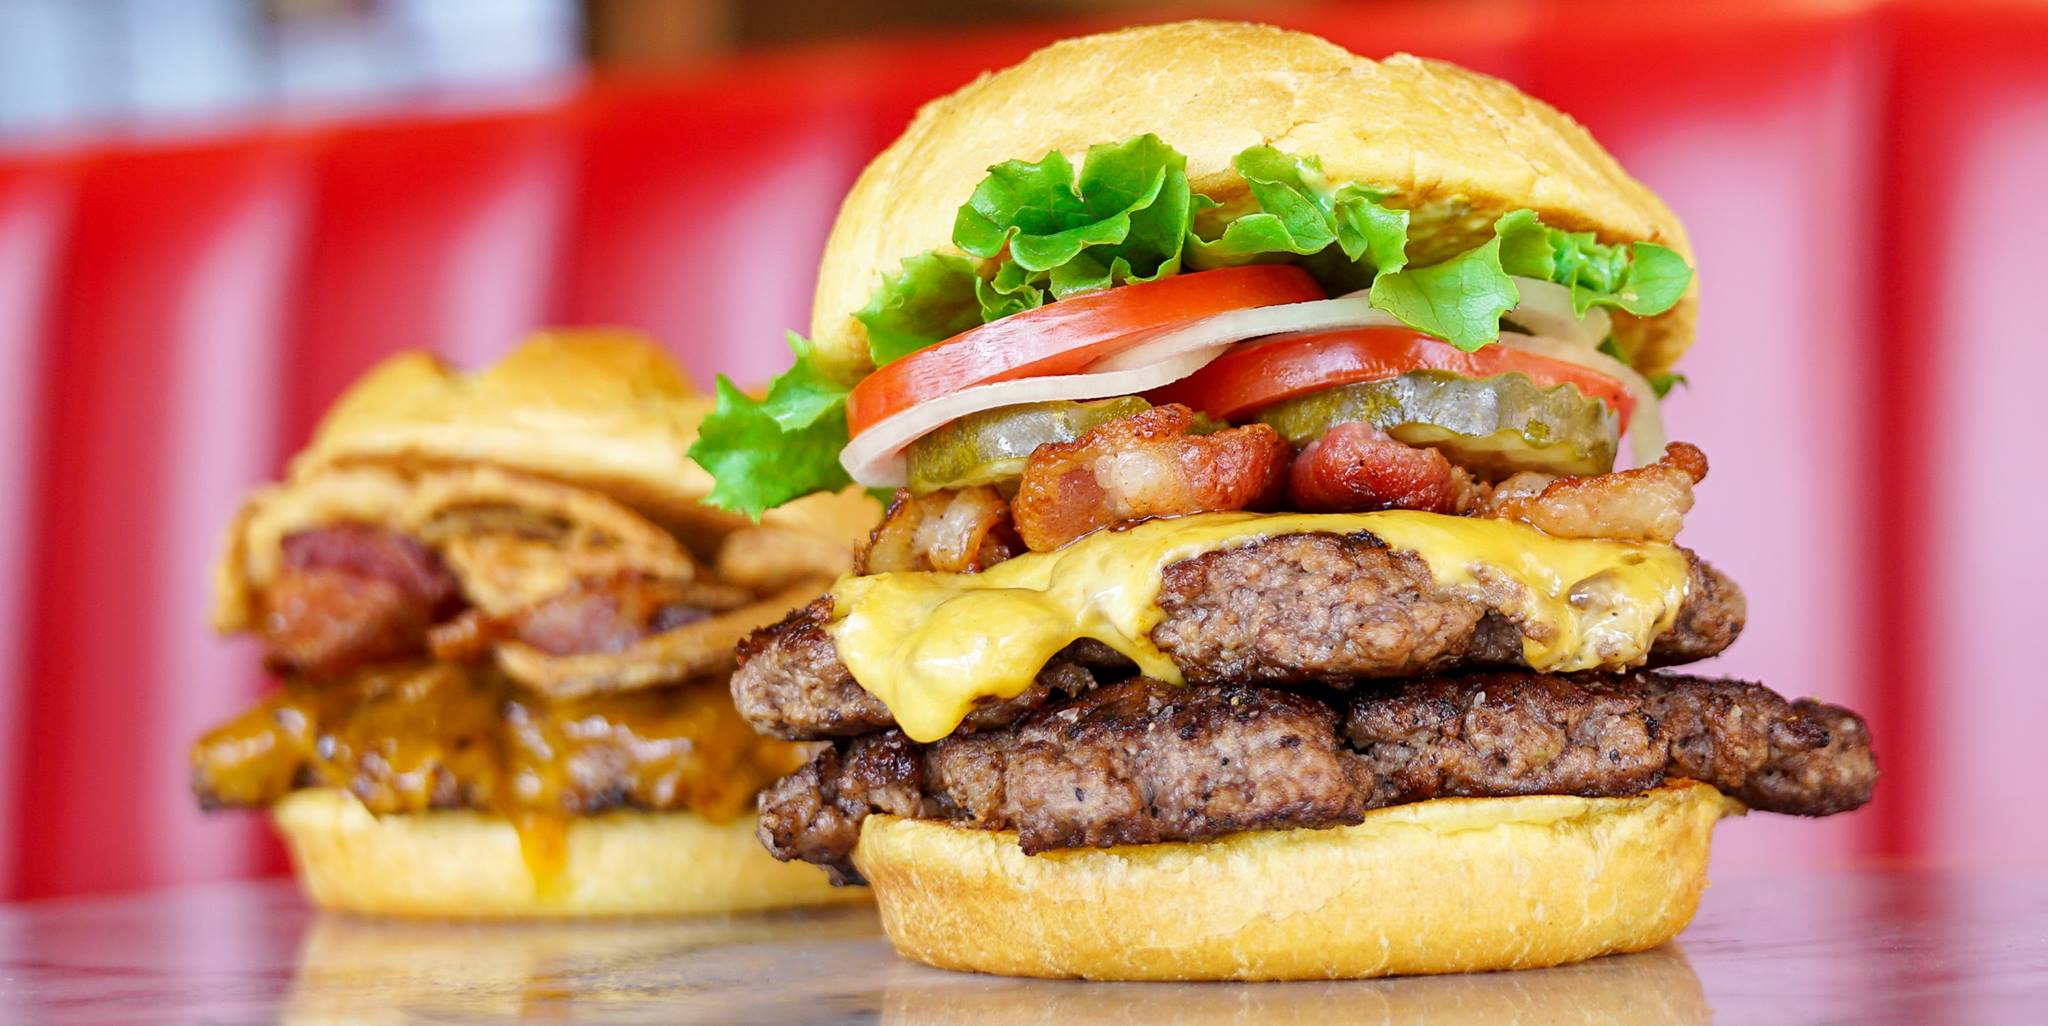 Smash Burger offers 100 days of FREE burgers with $100 Smash Pass